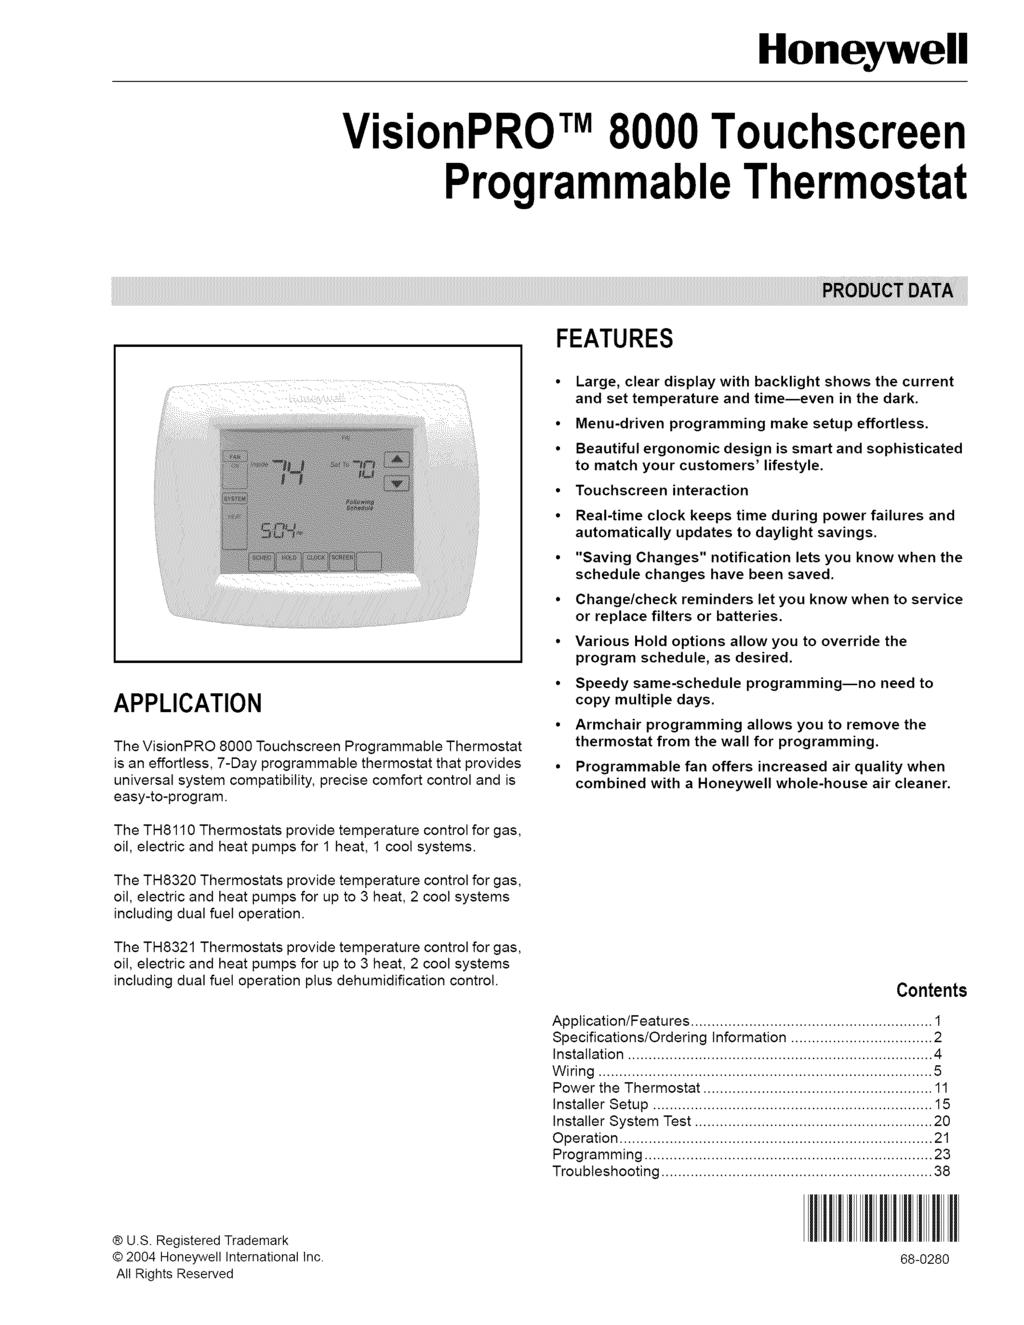 Honeywell VisionPRO TM8000 Touchscreen ProgrammableThermostat FEATURES Large, clear display with backlight shows the current and set temperature and time--even in the dark.